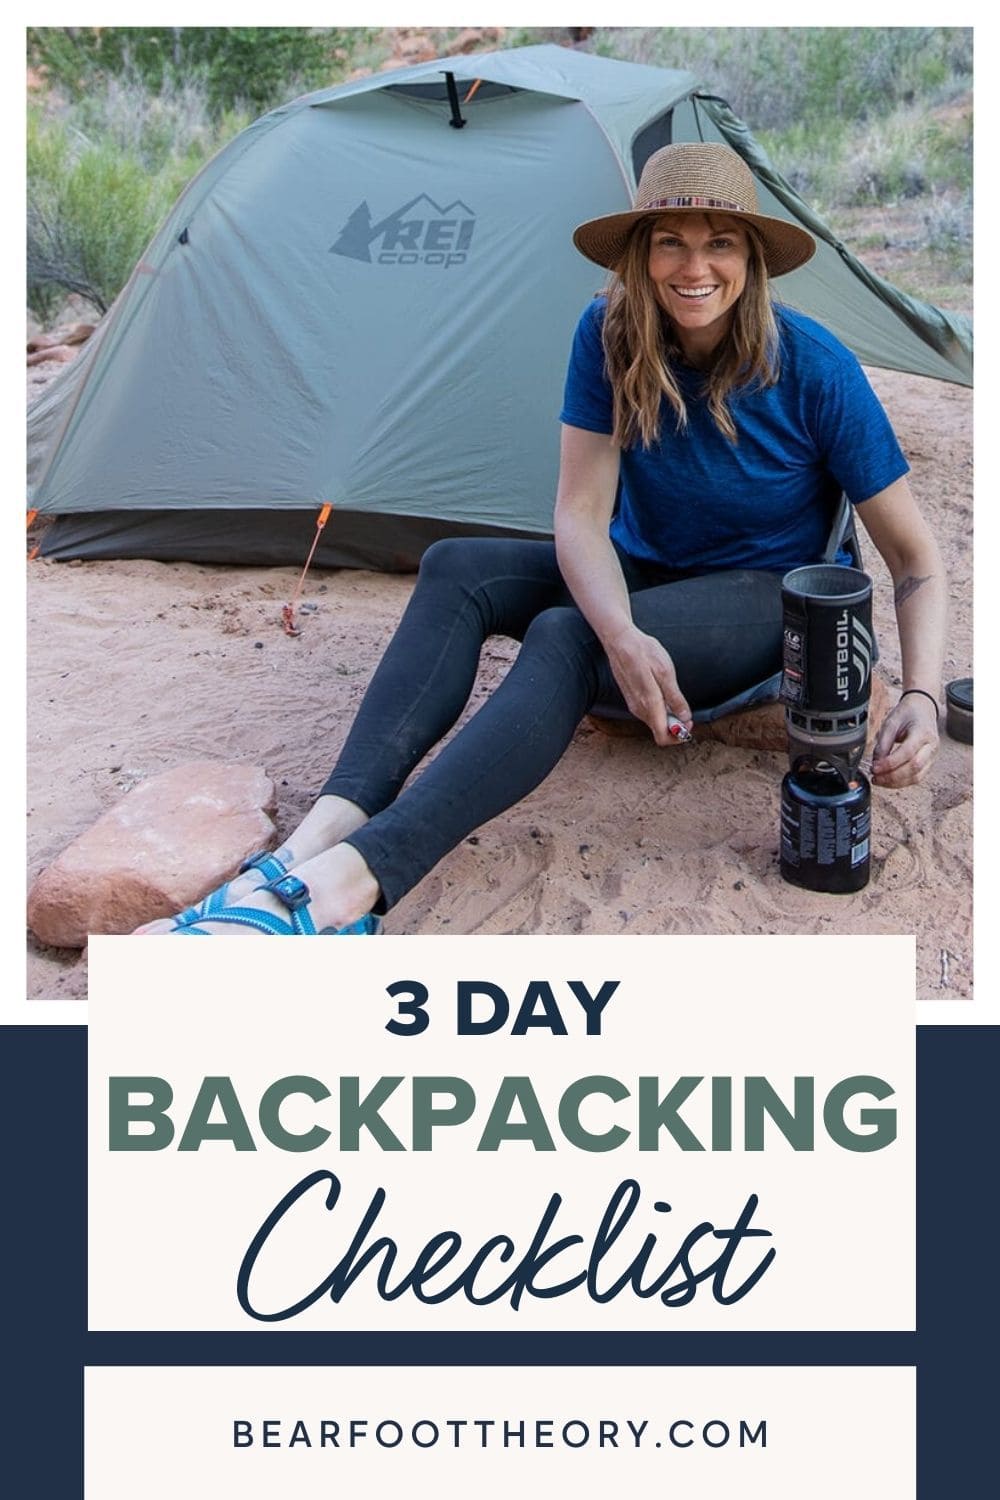 This complete backpacking checklist includes all the lightweight gear you'll need when packing for an overnight trip in the backcountry.